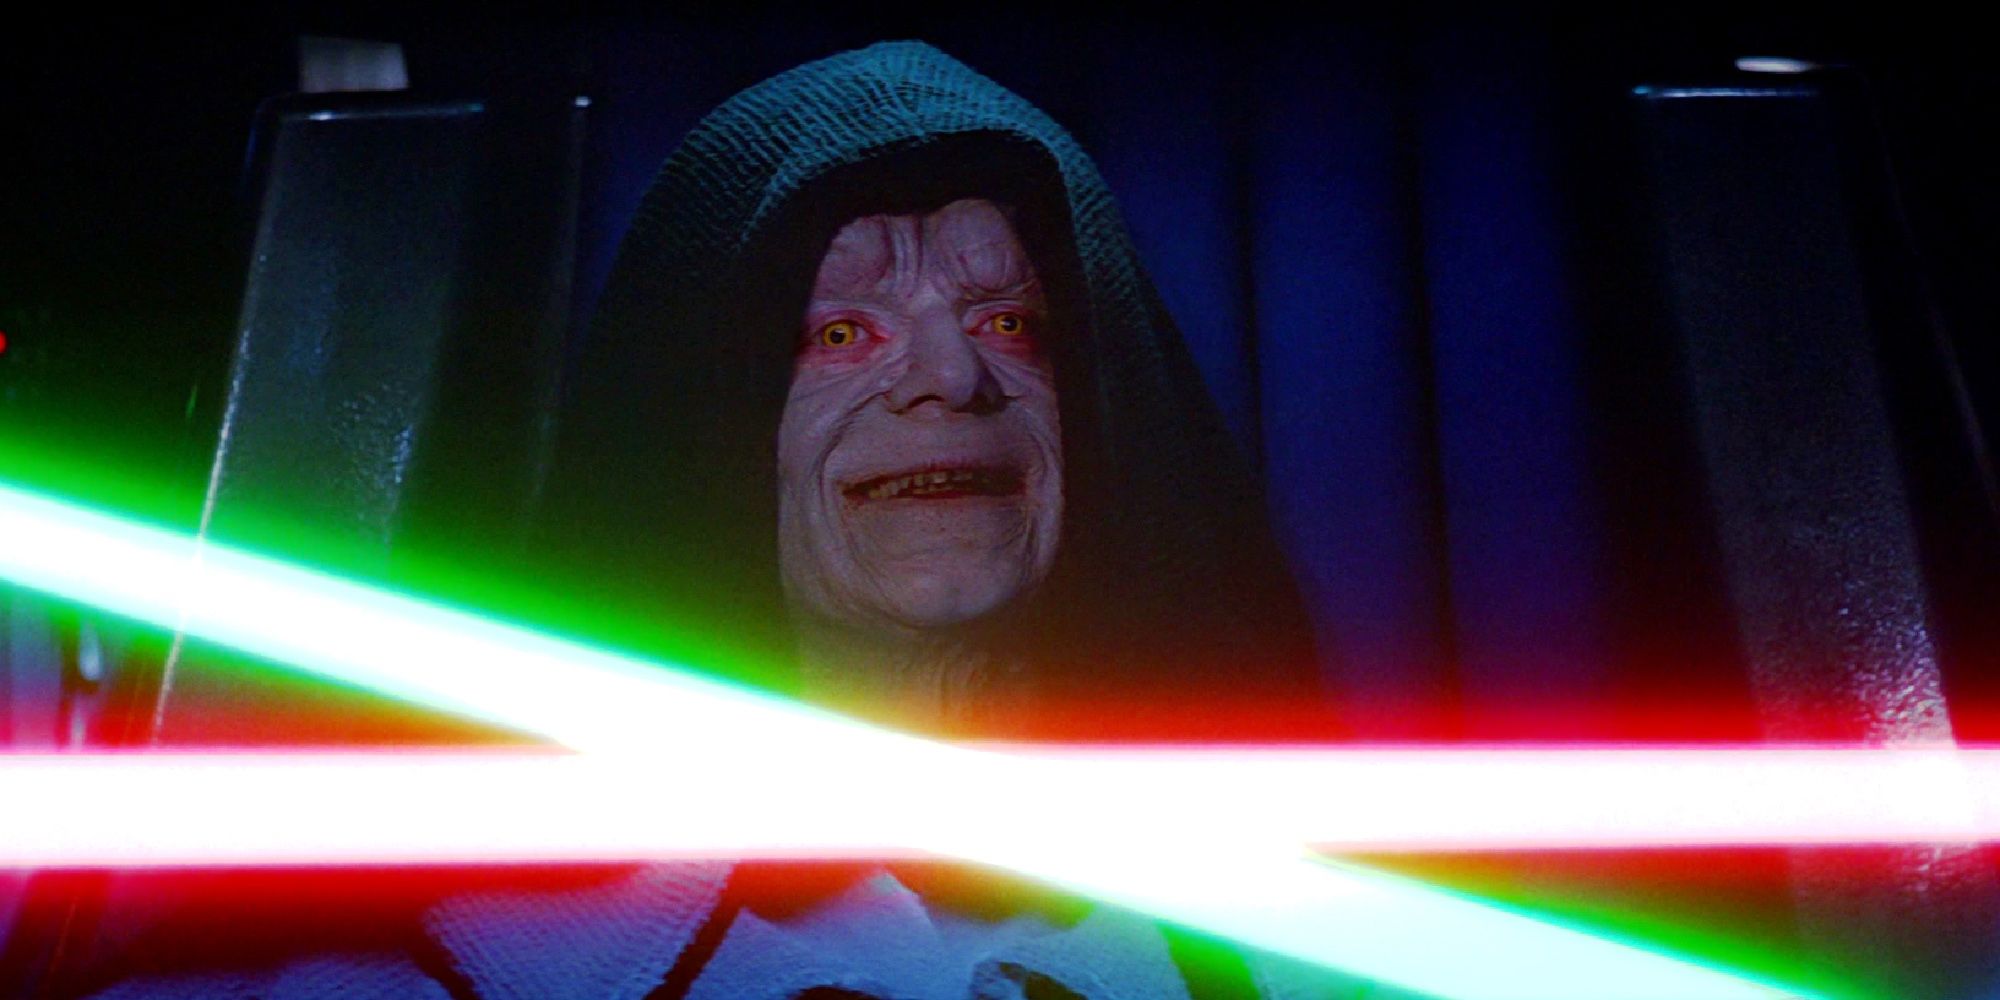 Luke and Vader's lightsabers clash over the Emperor in Return of the Jedi